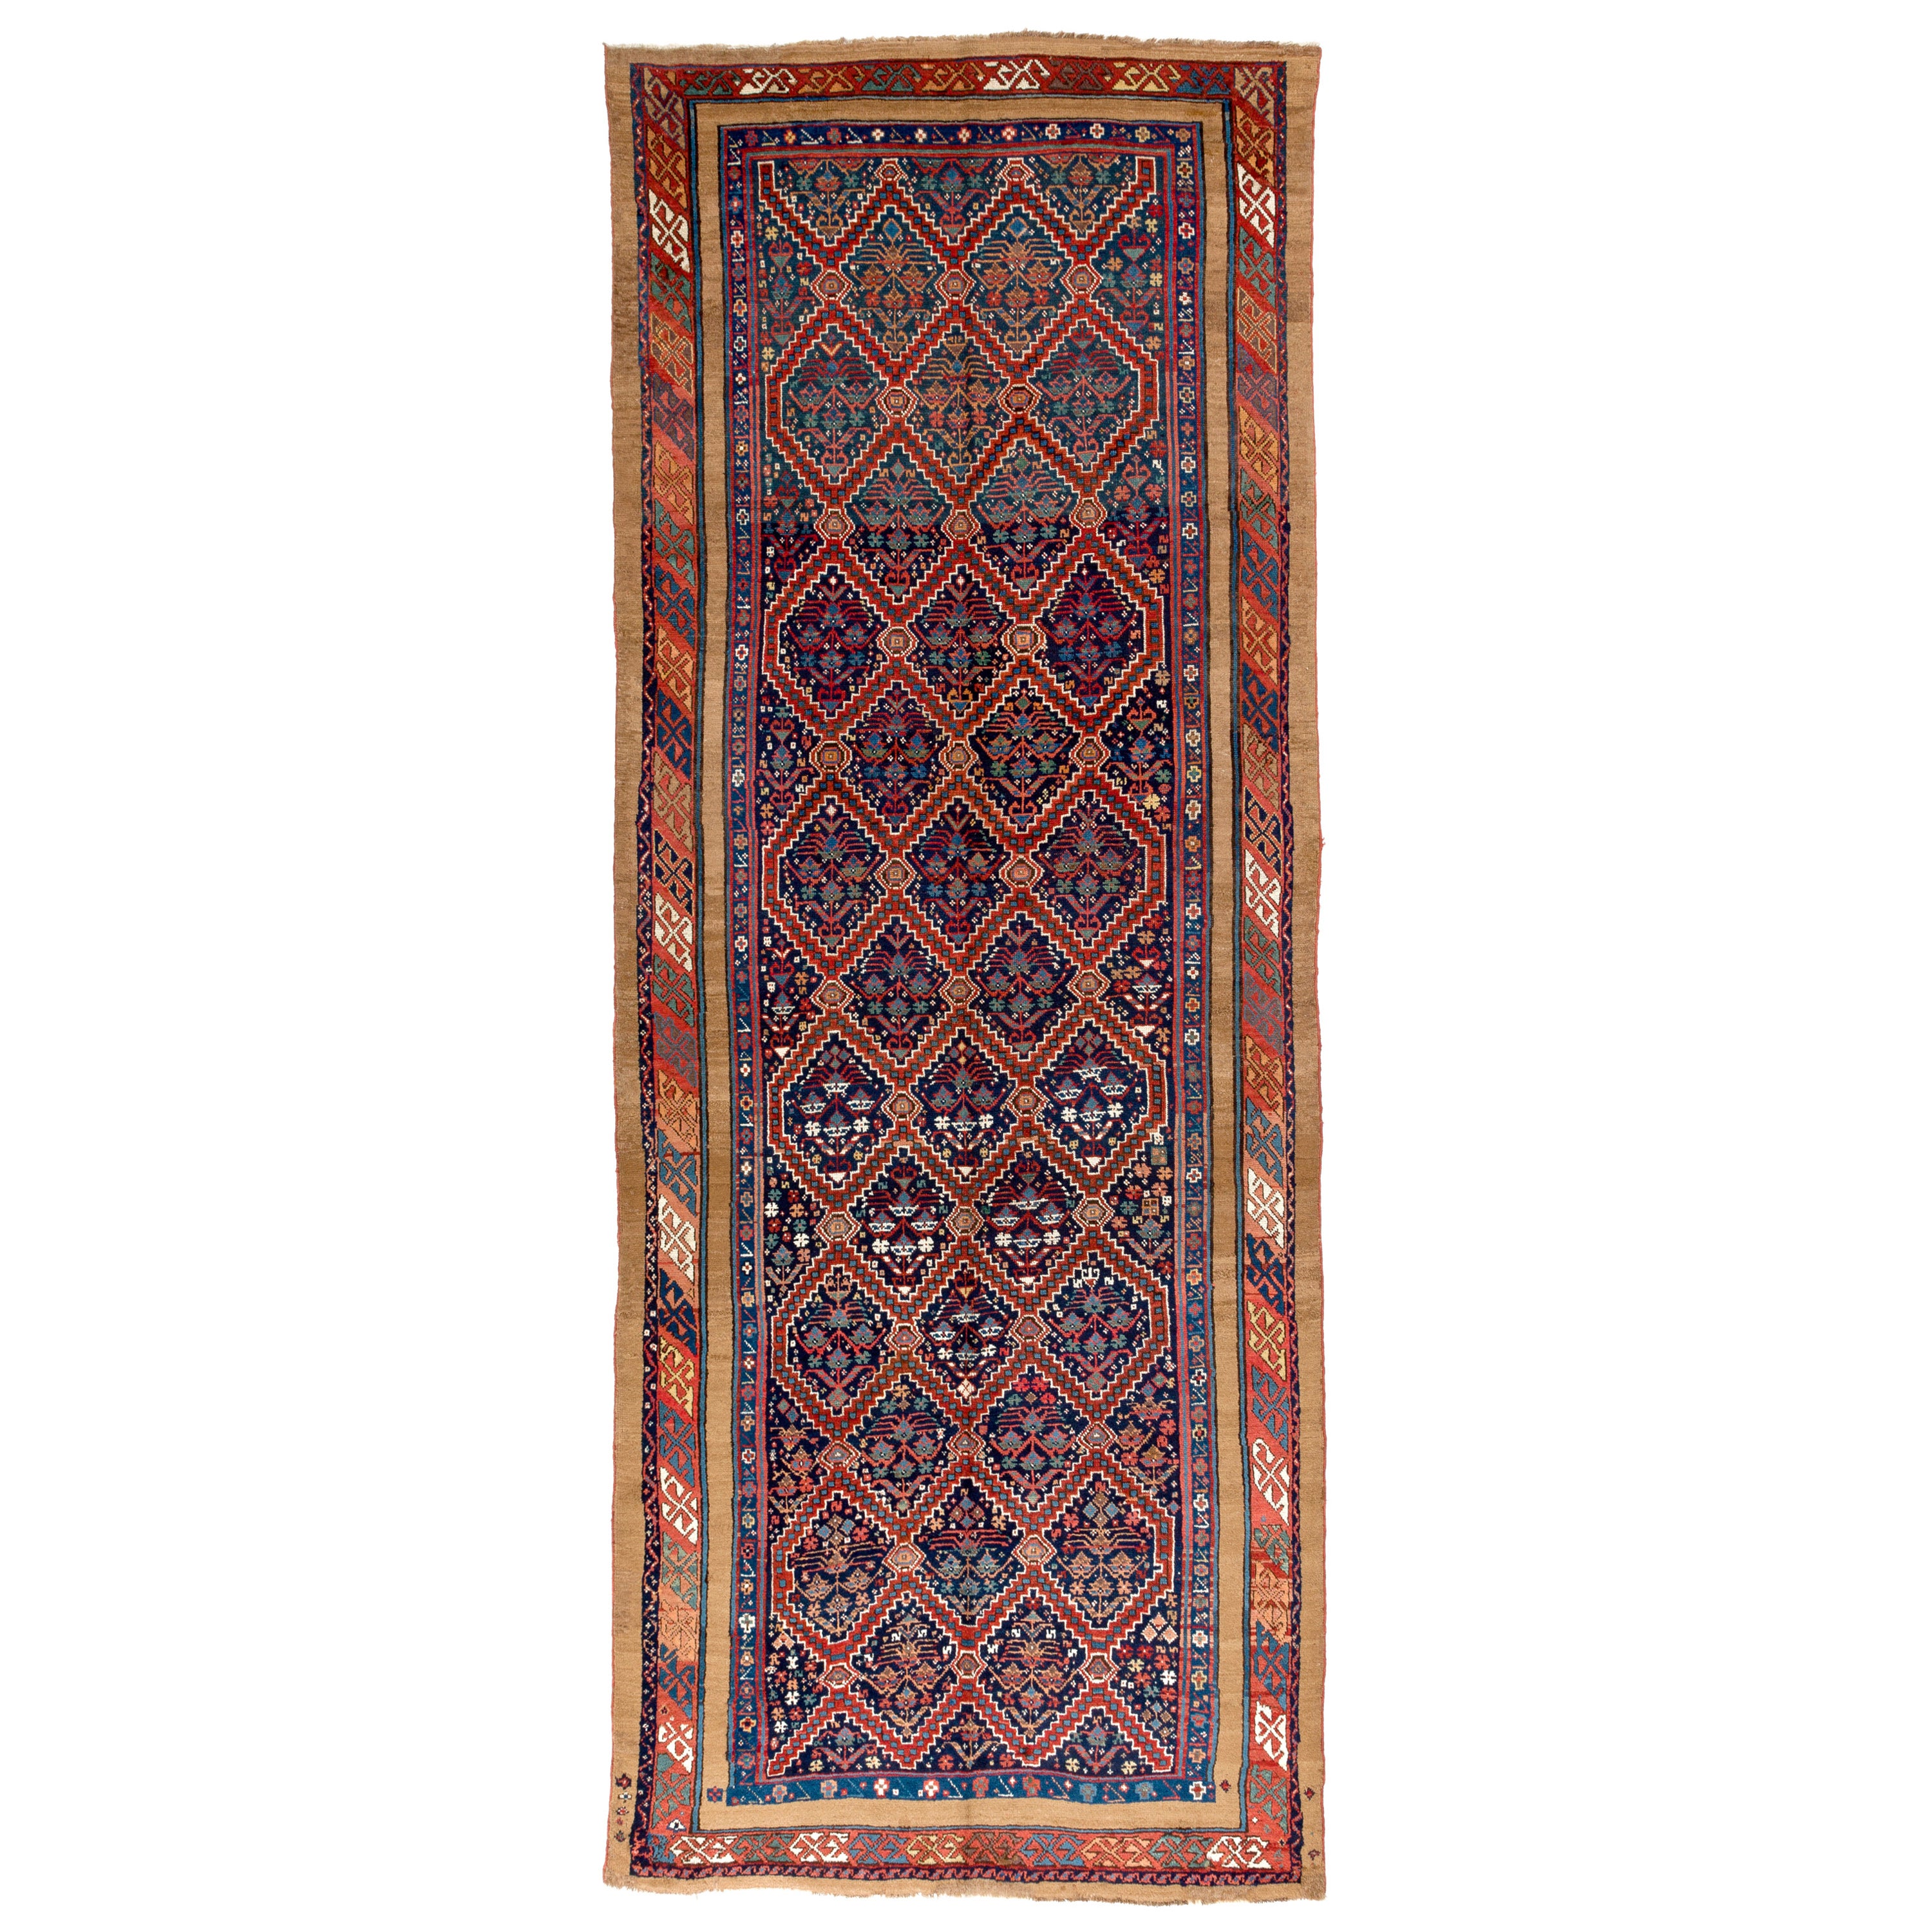 4.6x11.5 Ft Antique Serab Runner, Northwest Persia, One-of-a-Kind Rug, CA 1875 For Sale